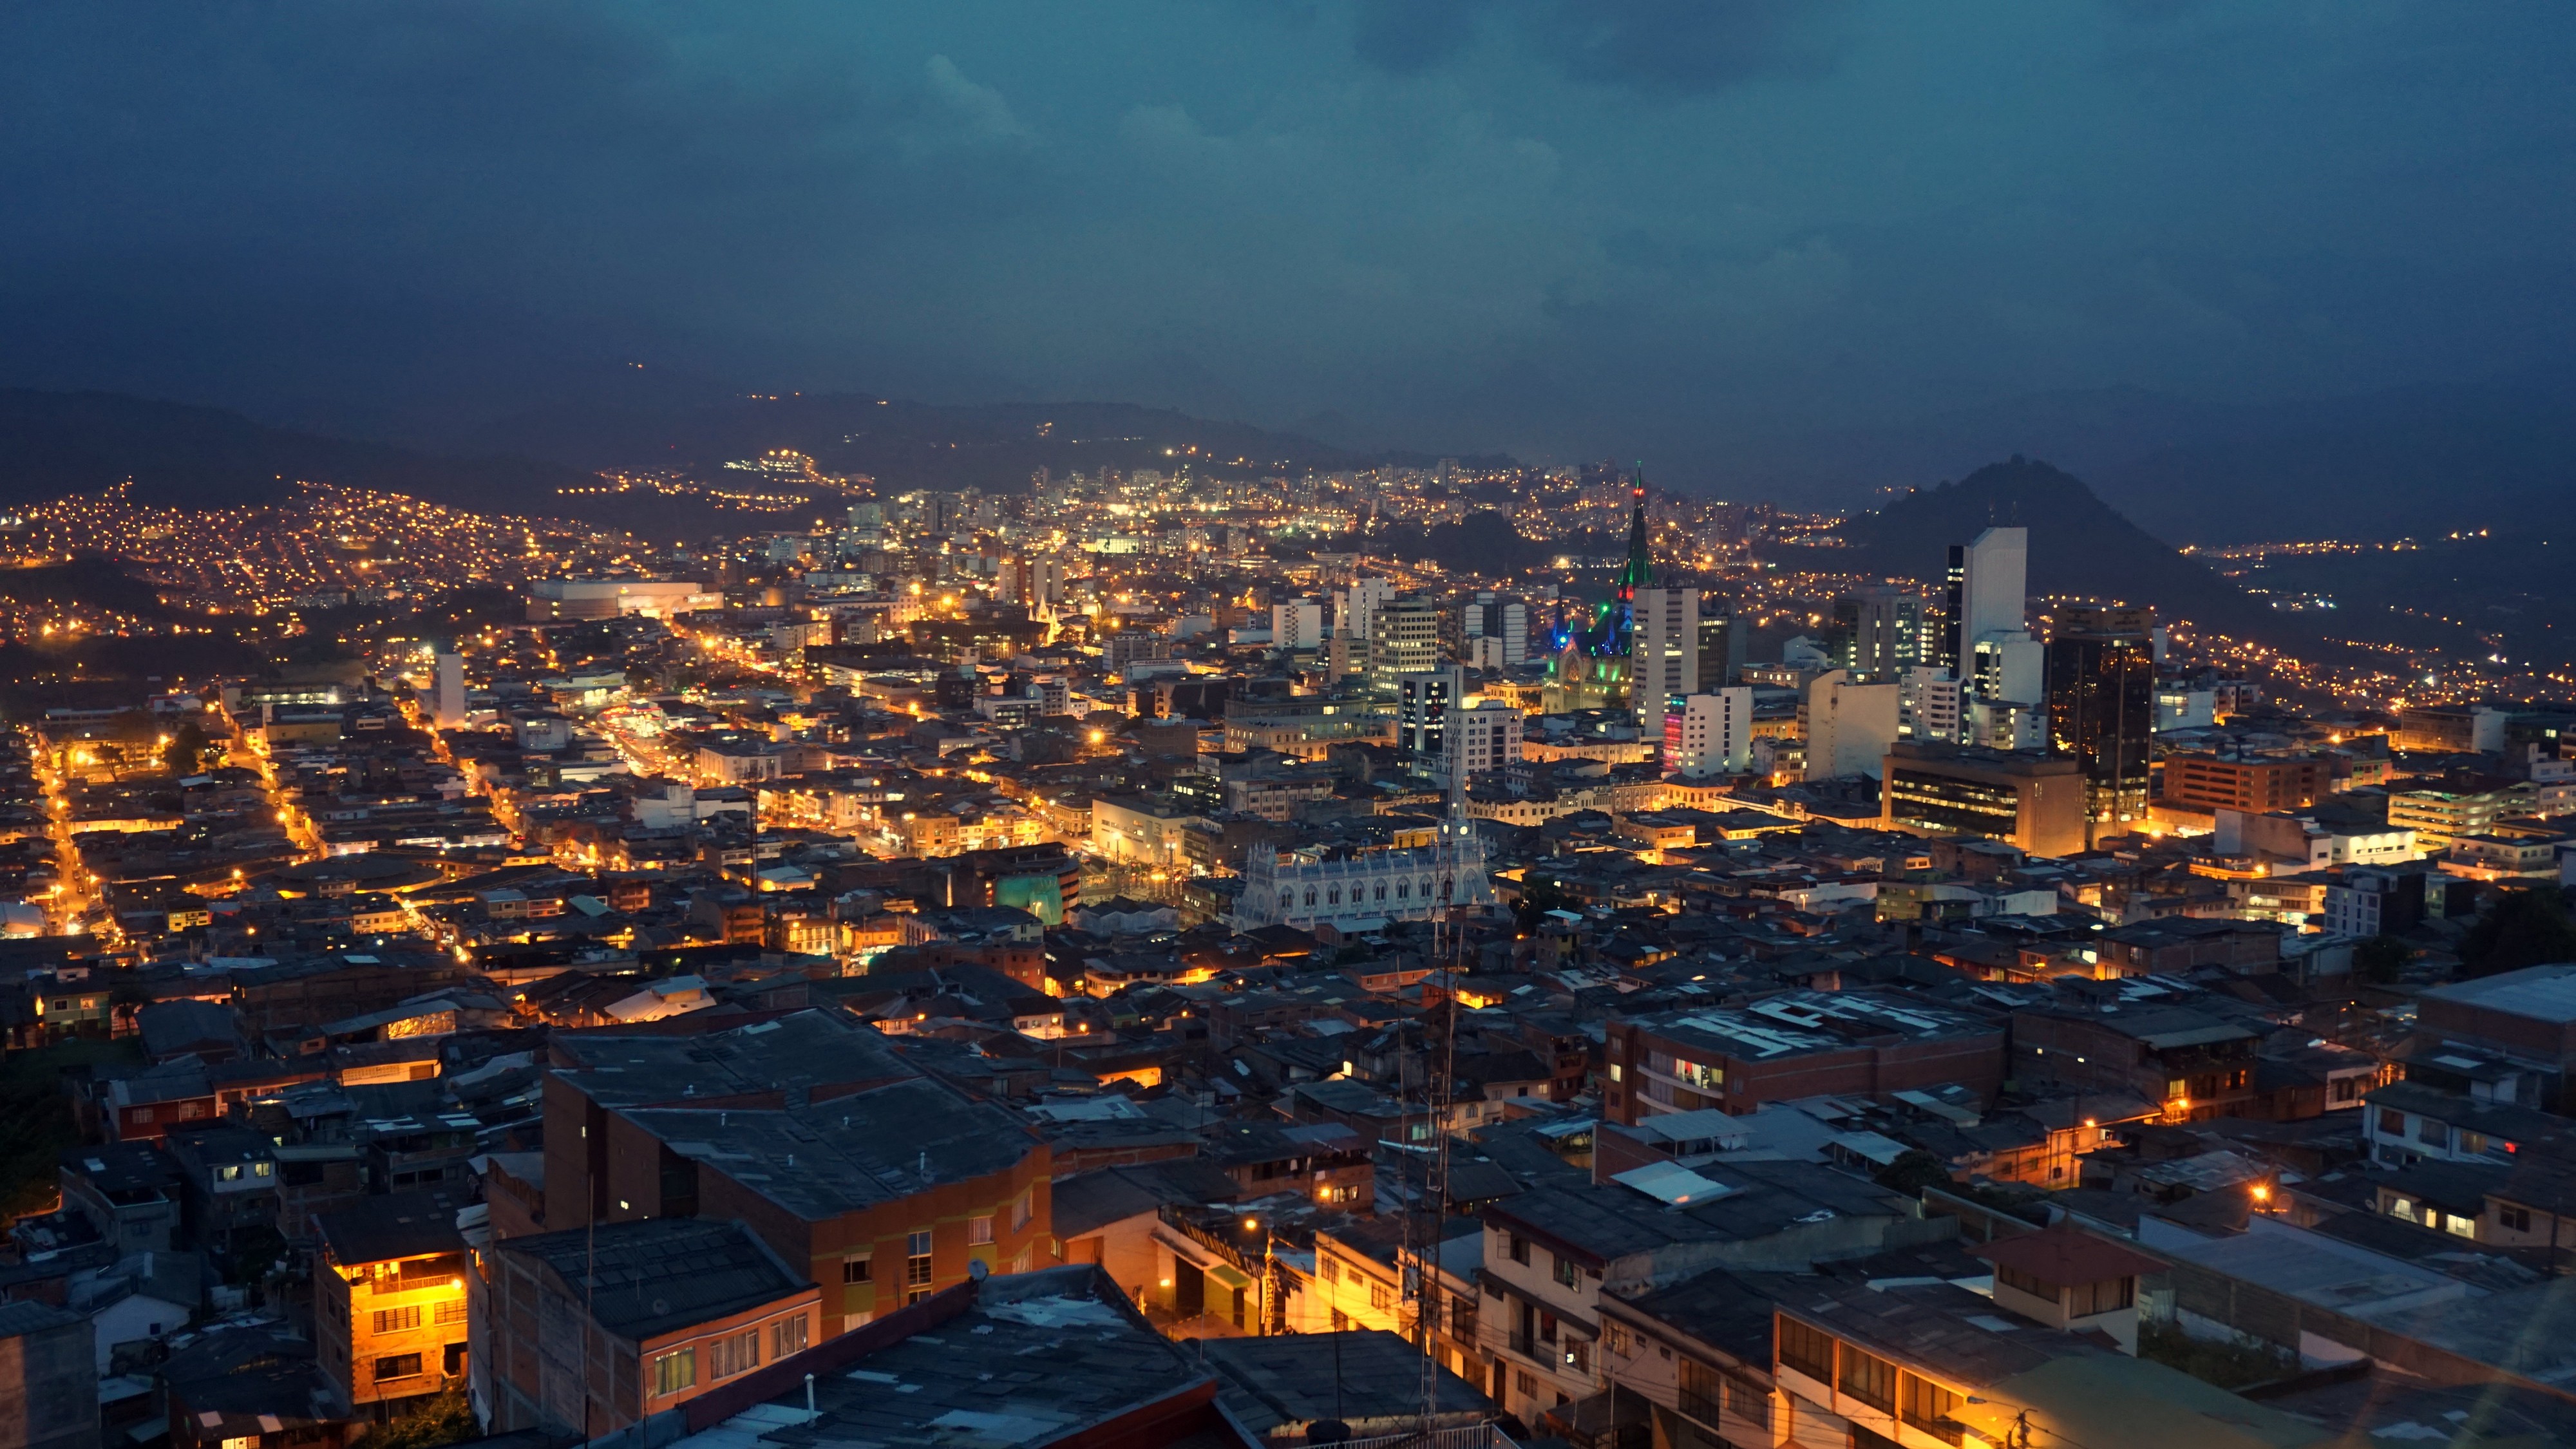 Manizales city center at dawn